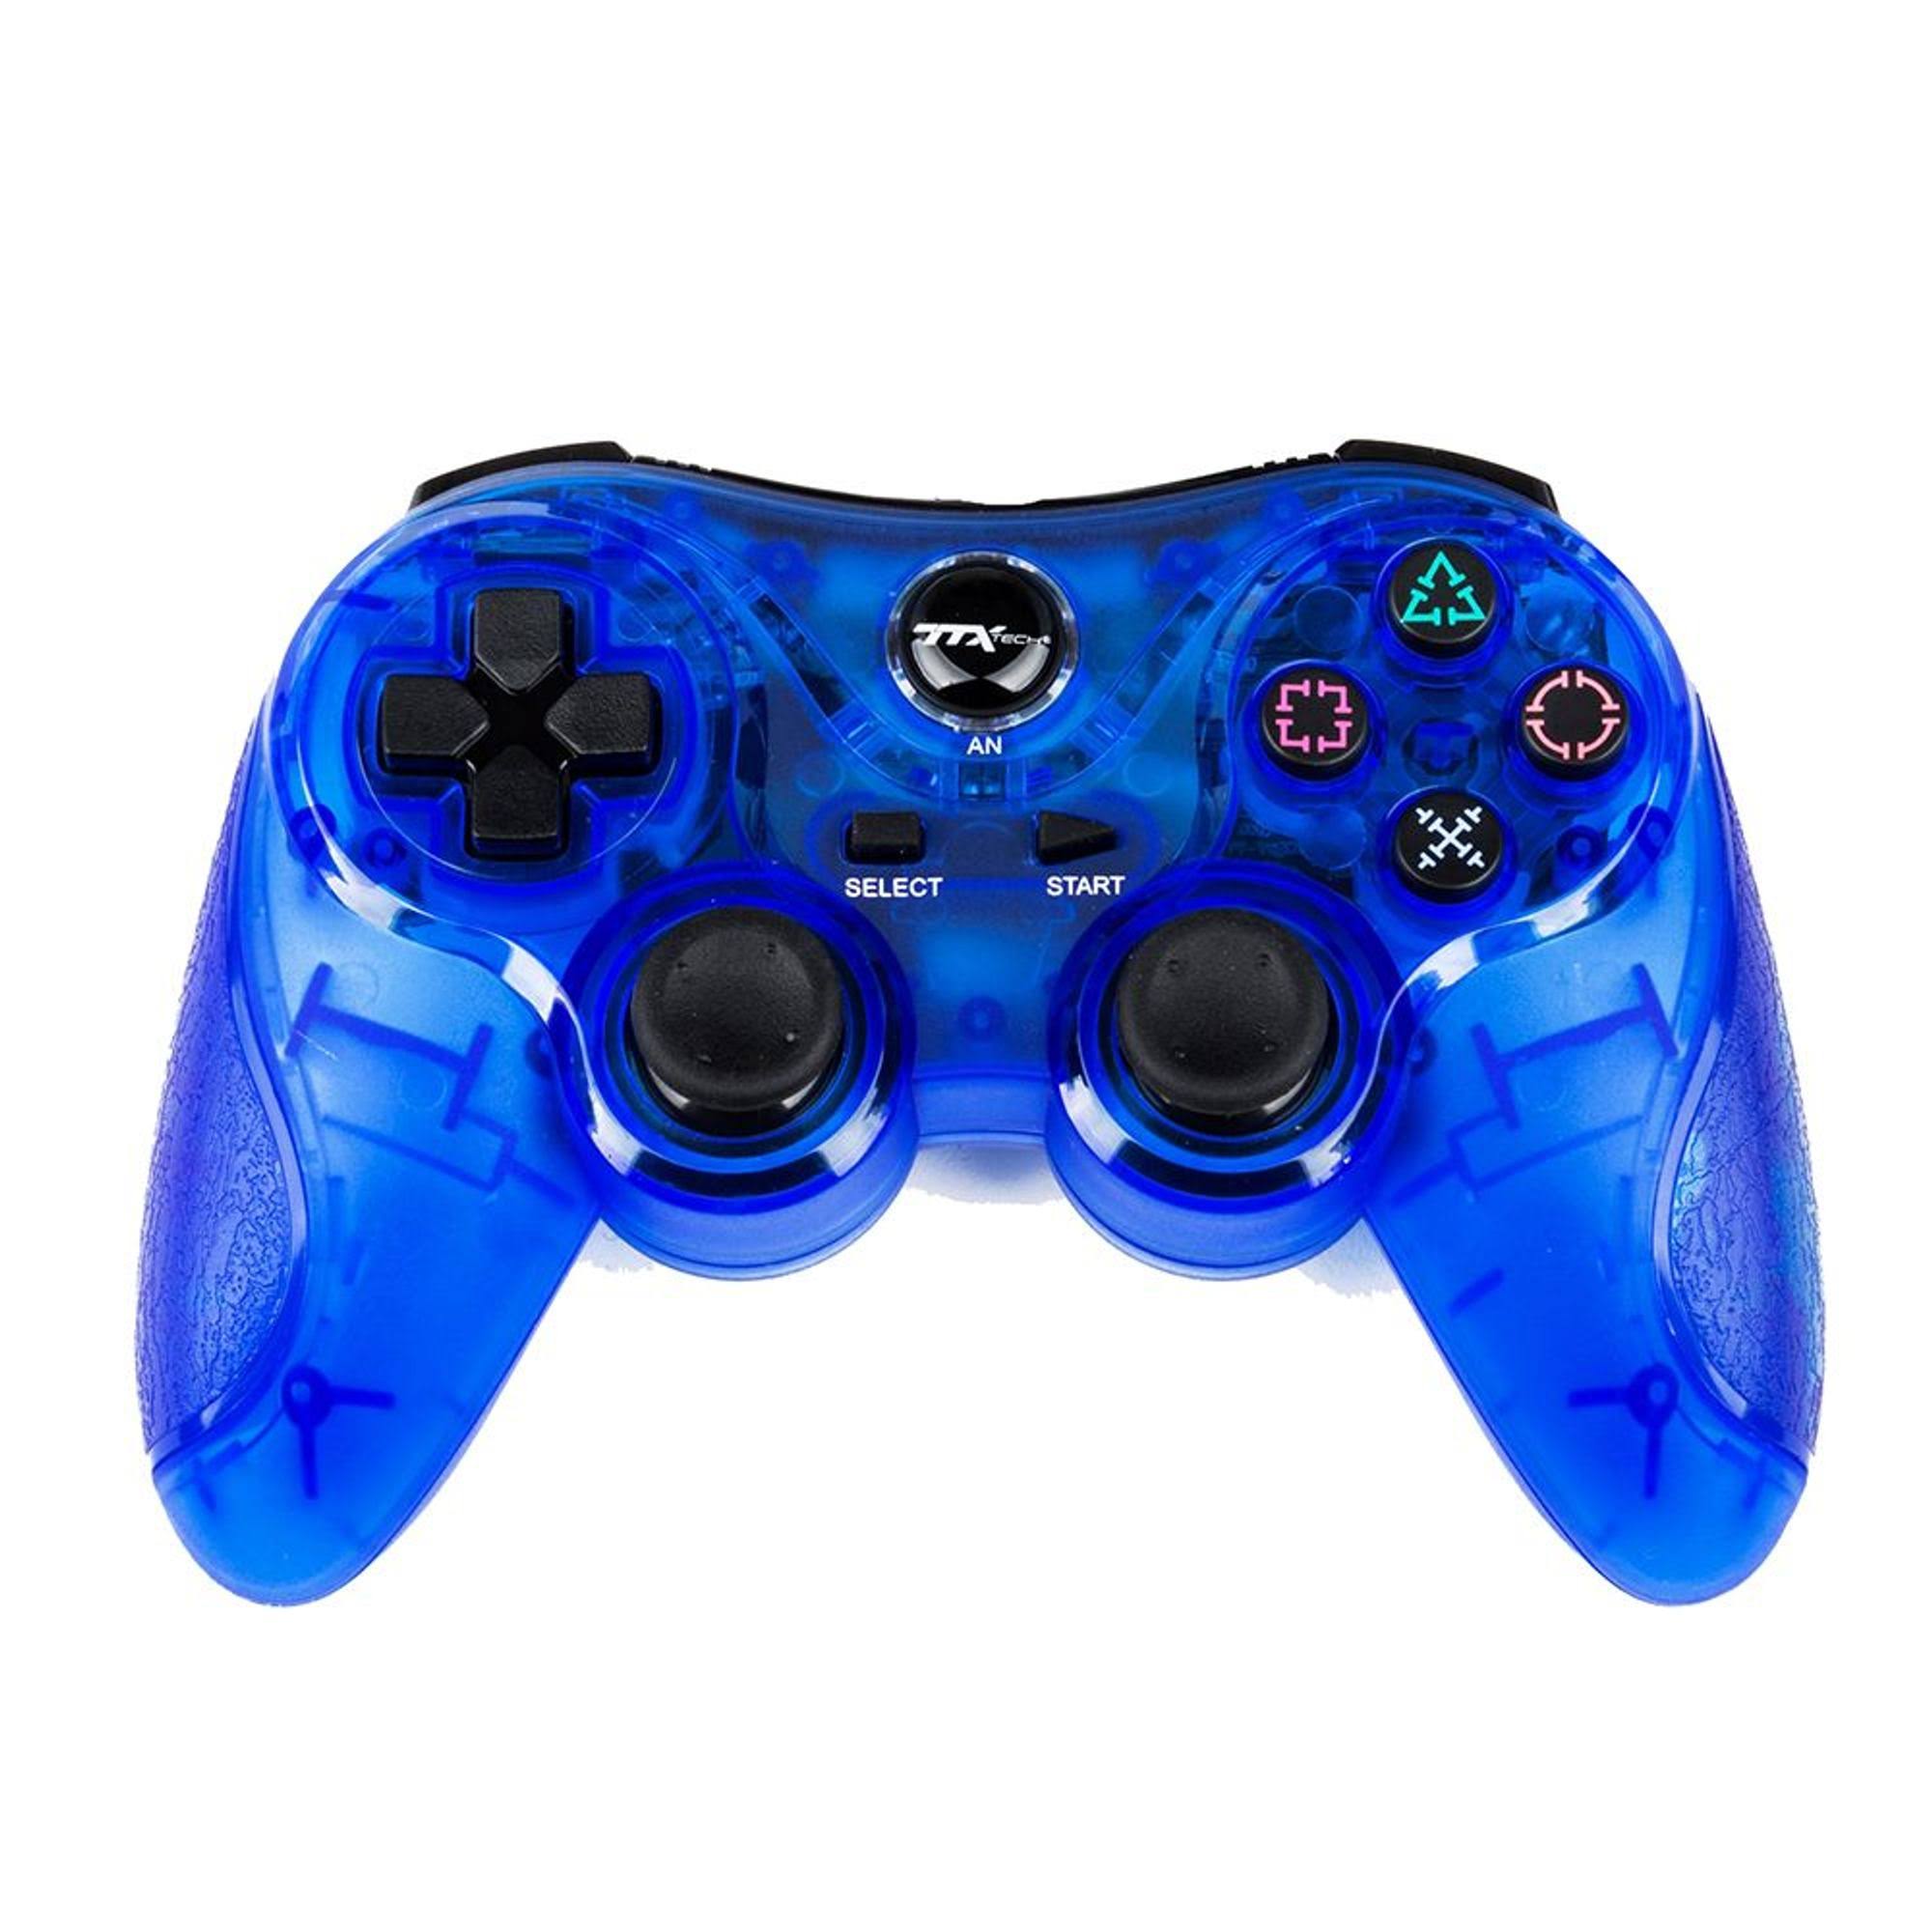 TTX Tech Sony PlayStation PS2/PS1 Wireless Controller, Blue